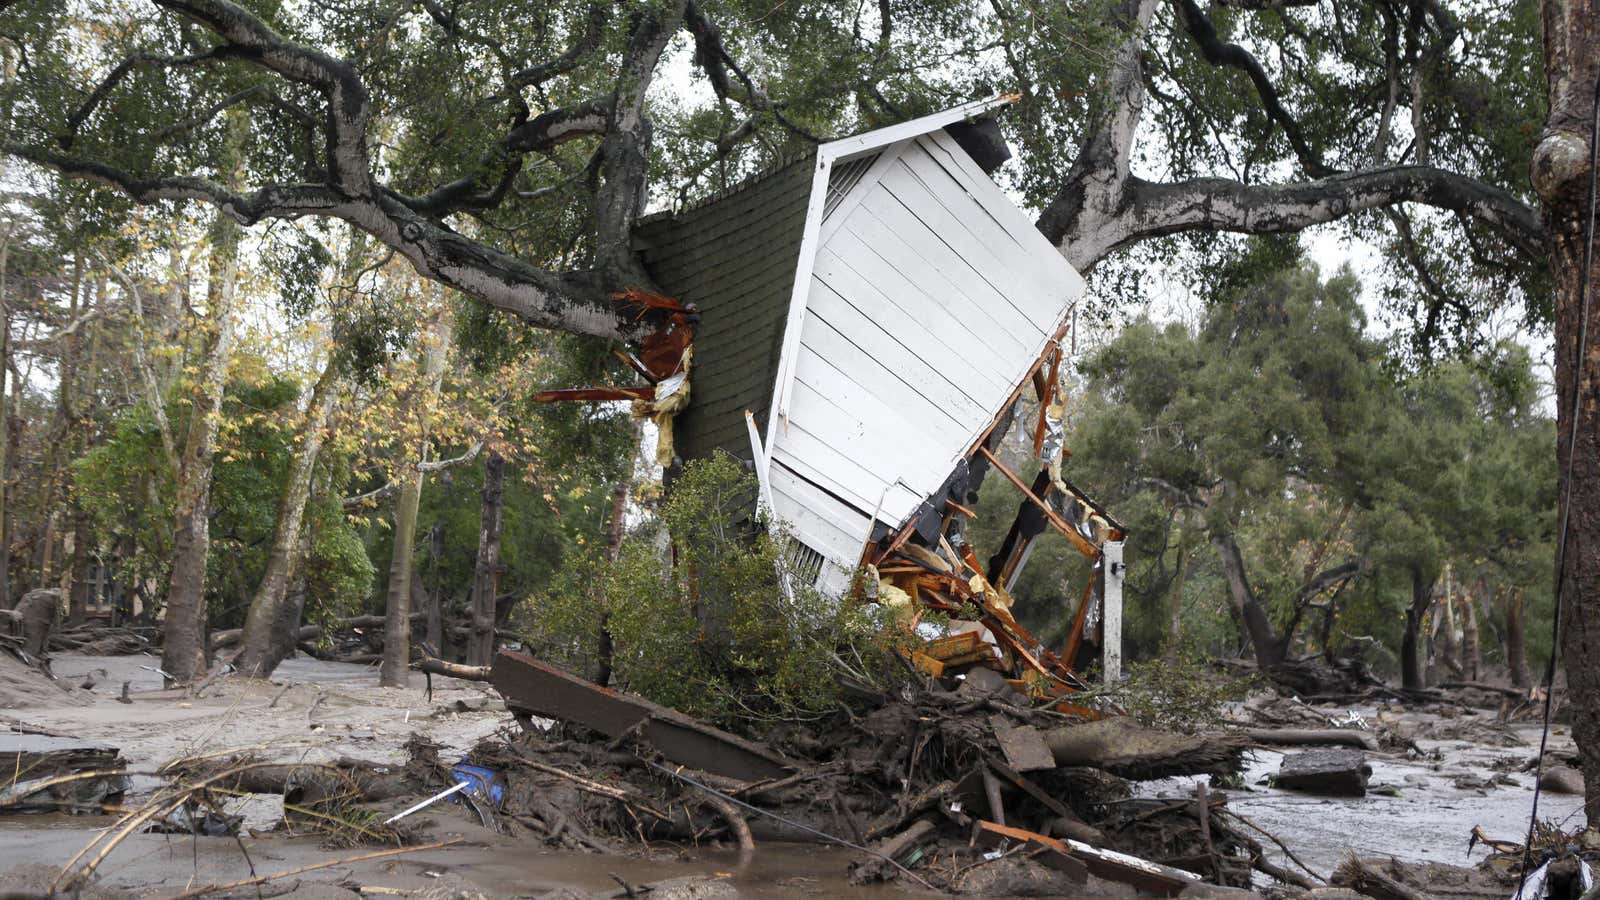 Several homes were swept away before dawn Tuesday when mud and debris roared into neighborhoods in Montecito from hillsides stripped of vegetation during a recent wildfire.